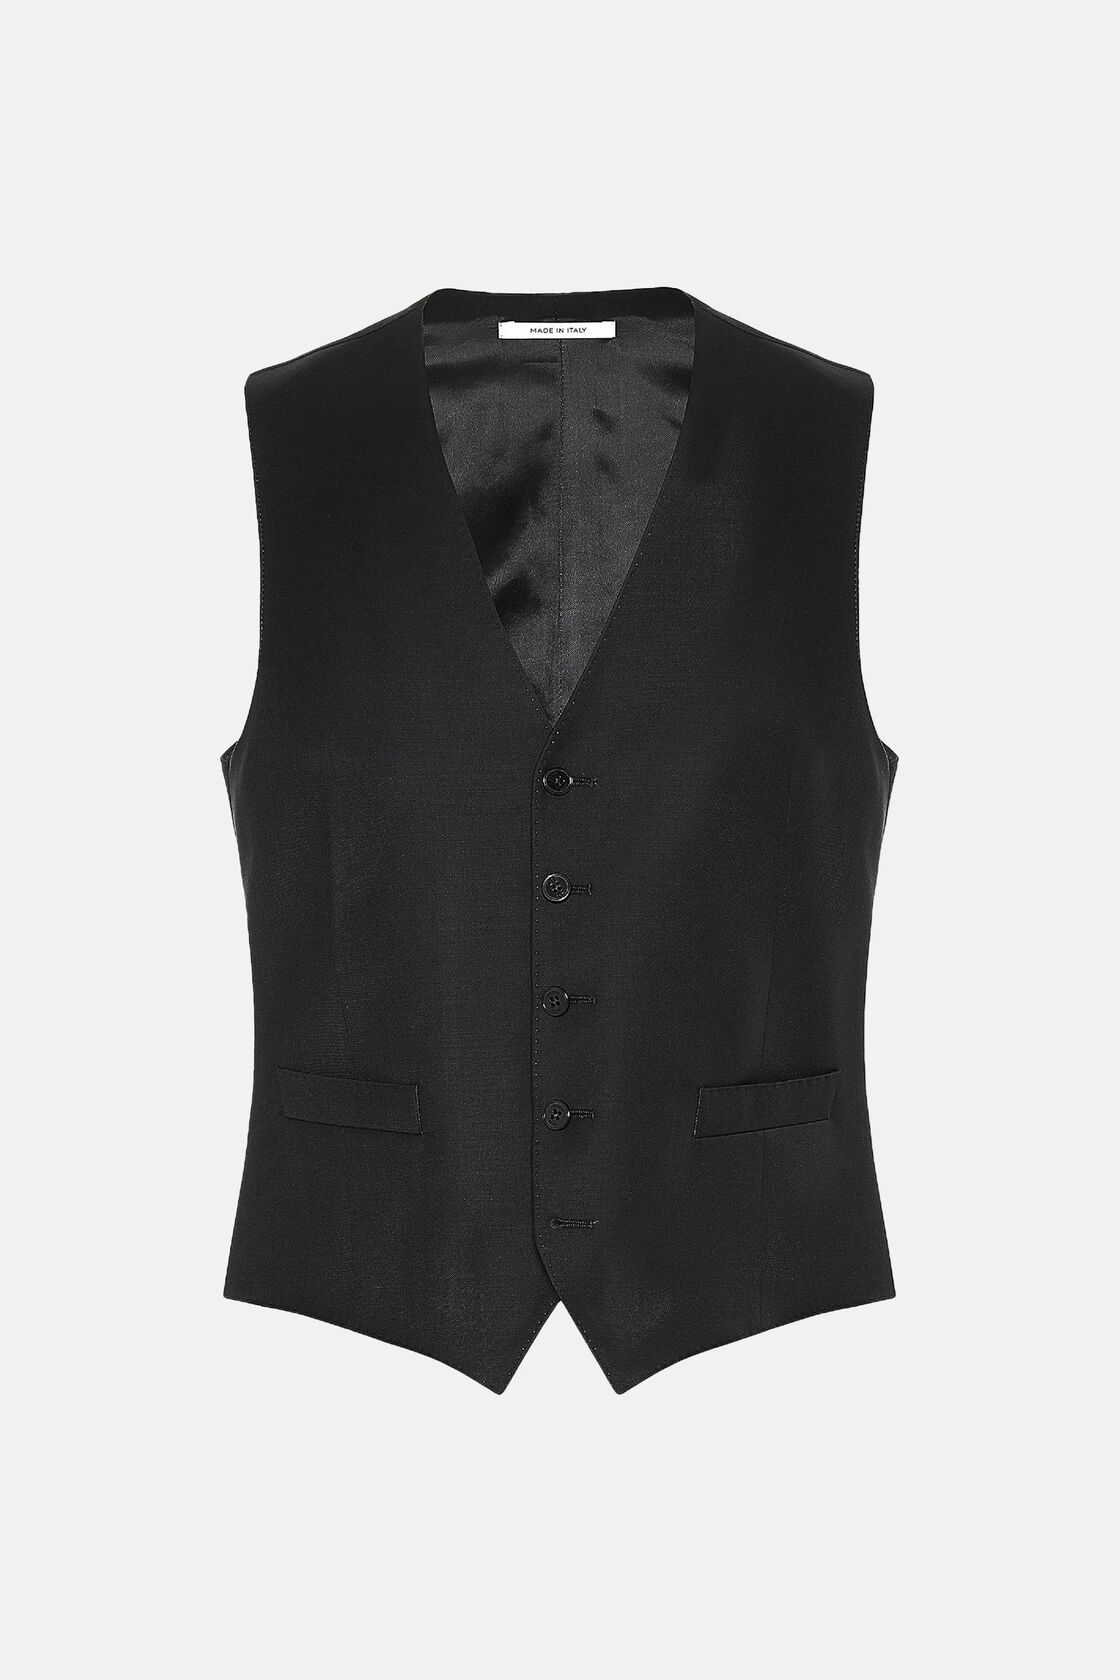 Anthracite Wool Waistcoat, Charcoal, hi-res